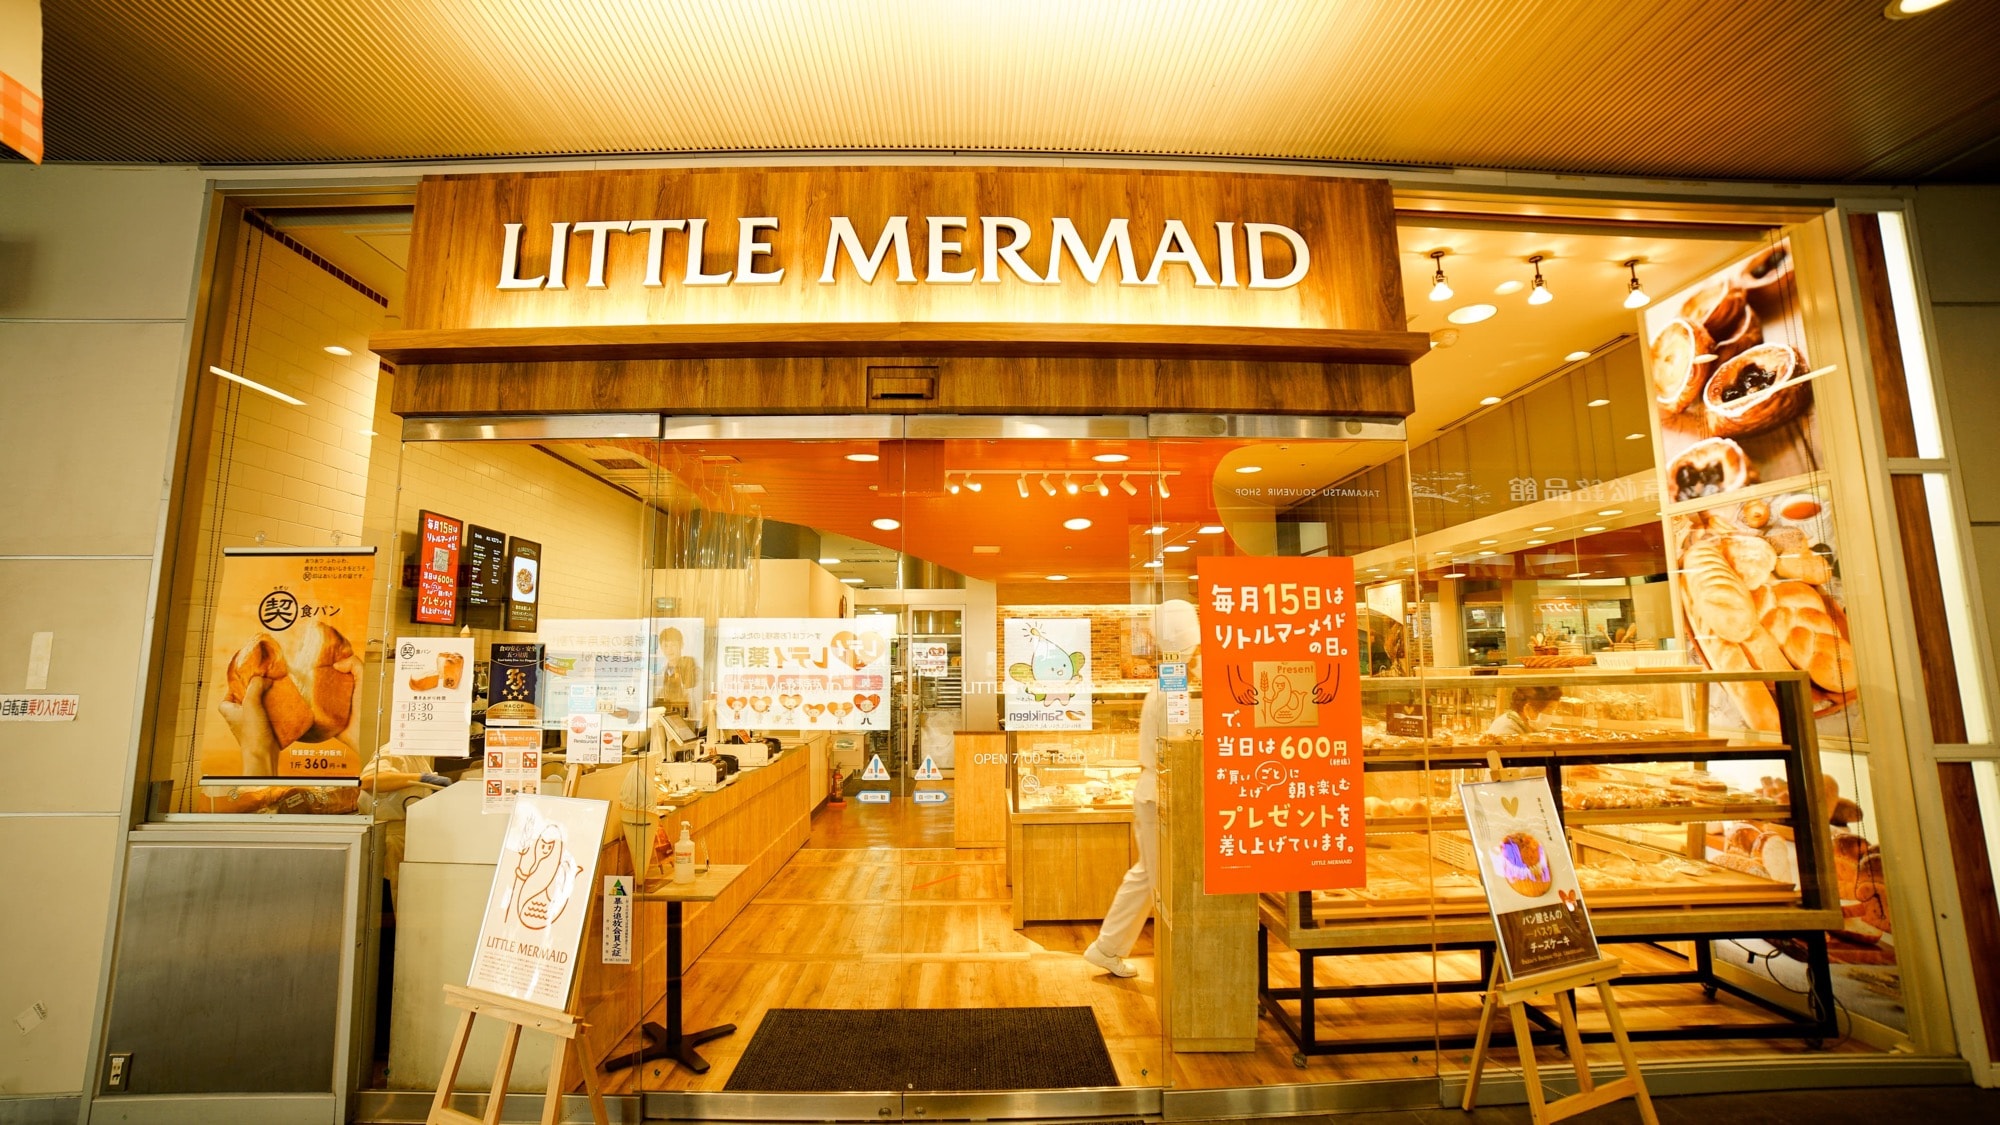 For breakfast, choose your favorite bread at the local bakery Little Mermaid ♪ ★